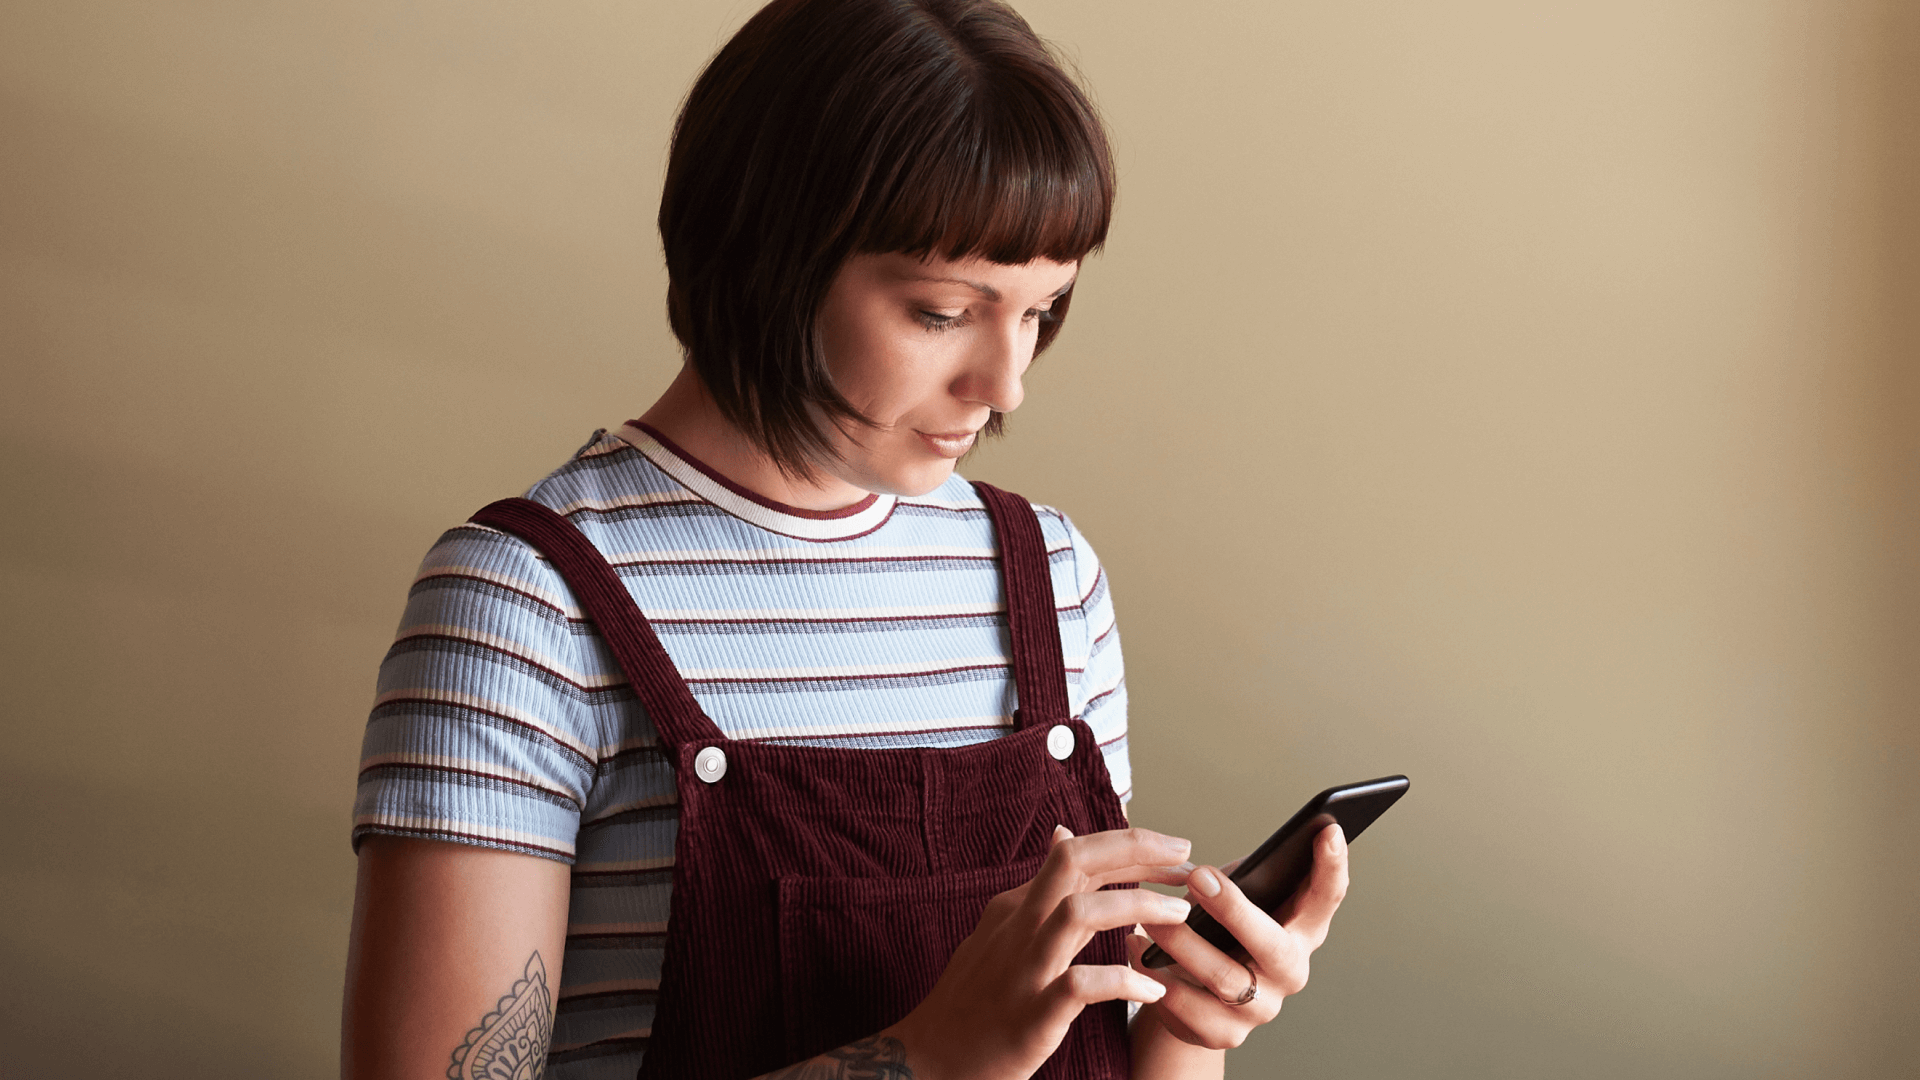 Image of a young woman looking at her phone.